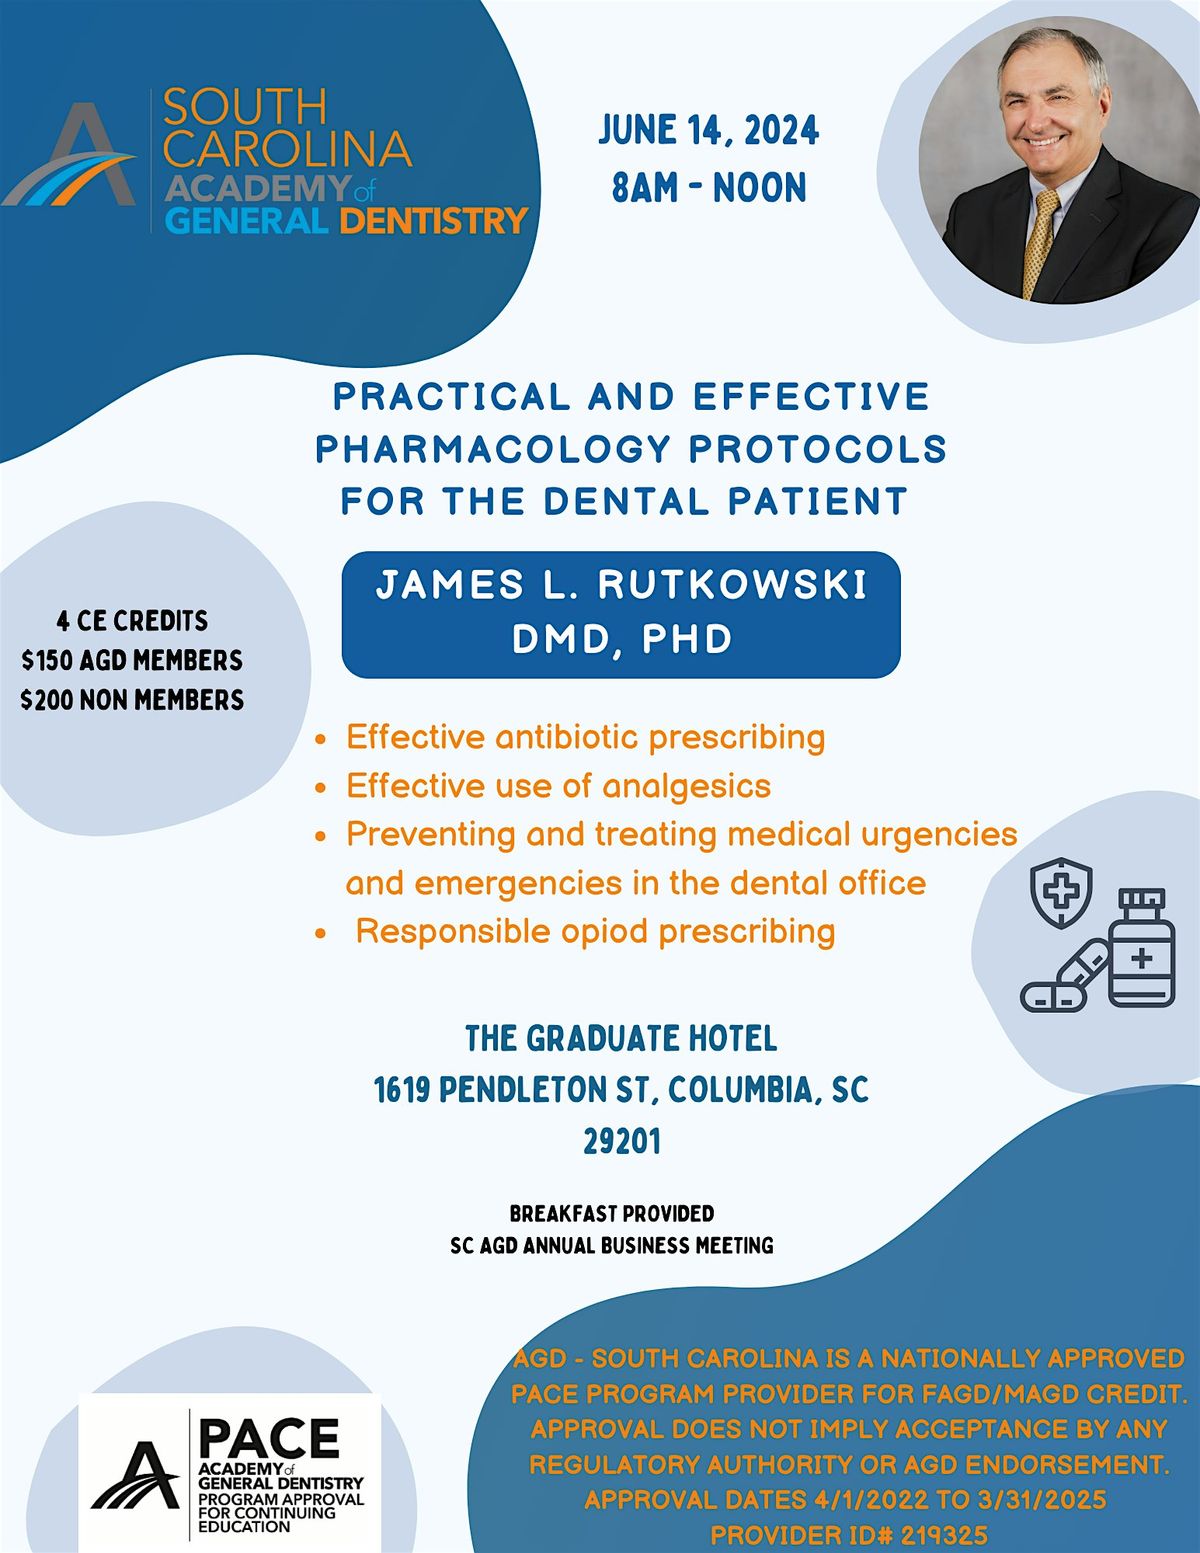 Practical and Effective Pharmacology Protocols for the Dental Patient